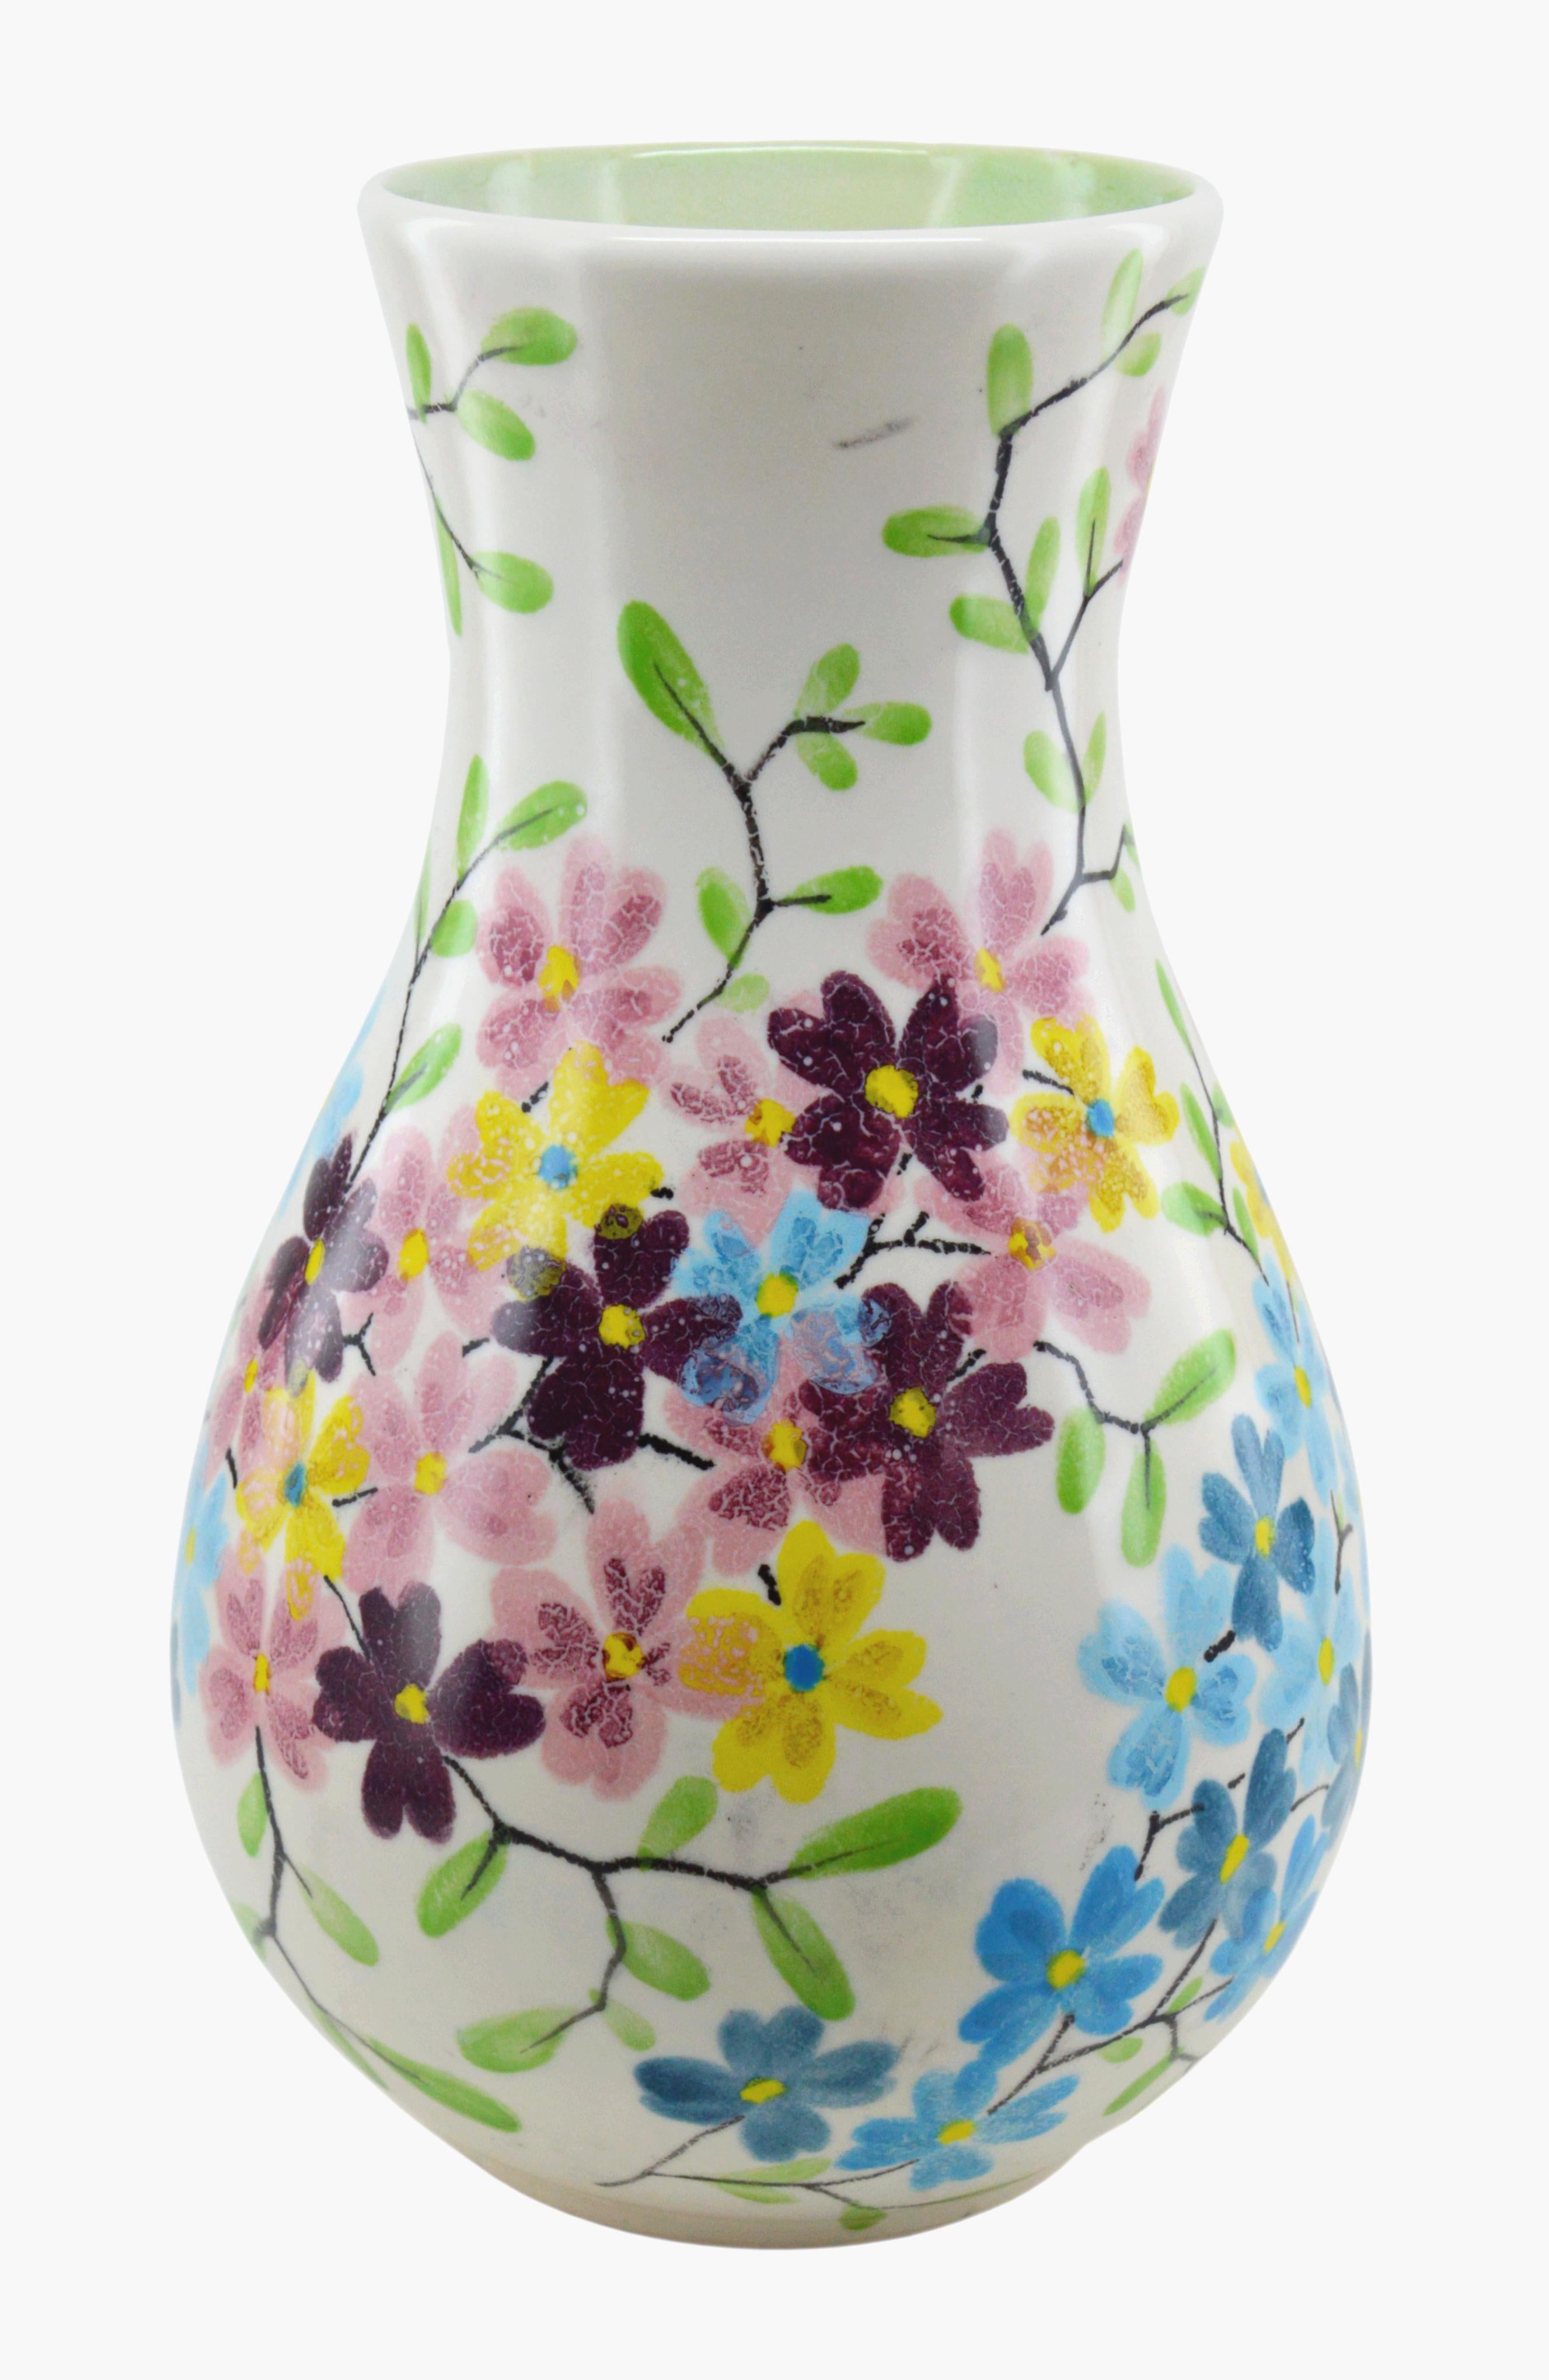 Rare Midcentury ceramic vase by Ceramiques Ricard (Le Castellet and Bendor Island), France, 1950s. Hand painted by Octave Congui. Measures: Height 35 cm - 13.8 in., diameter 21.5cm - 8.5 in.